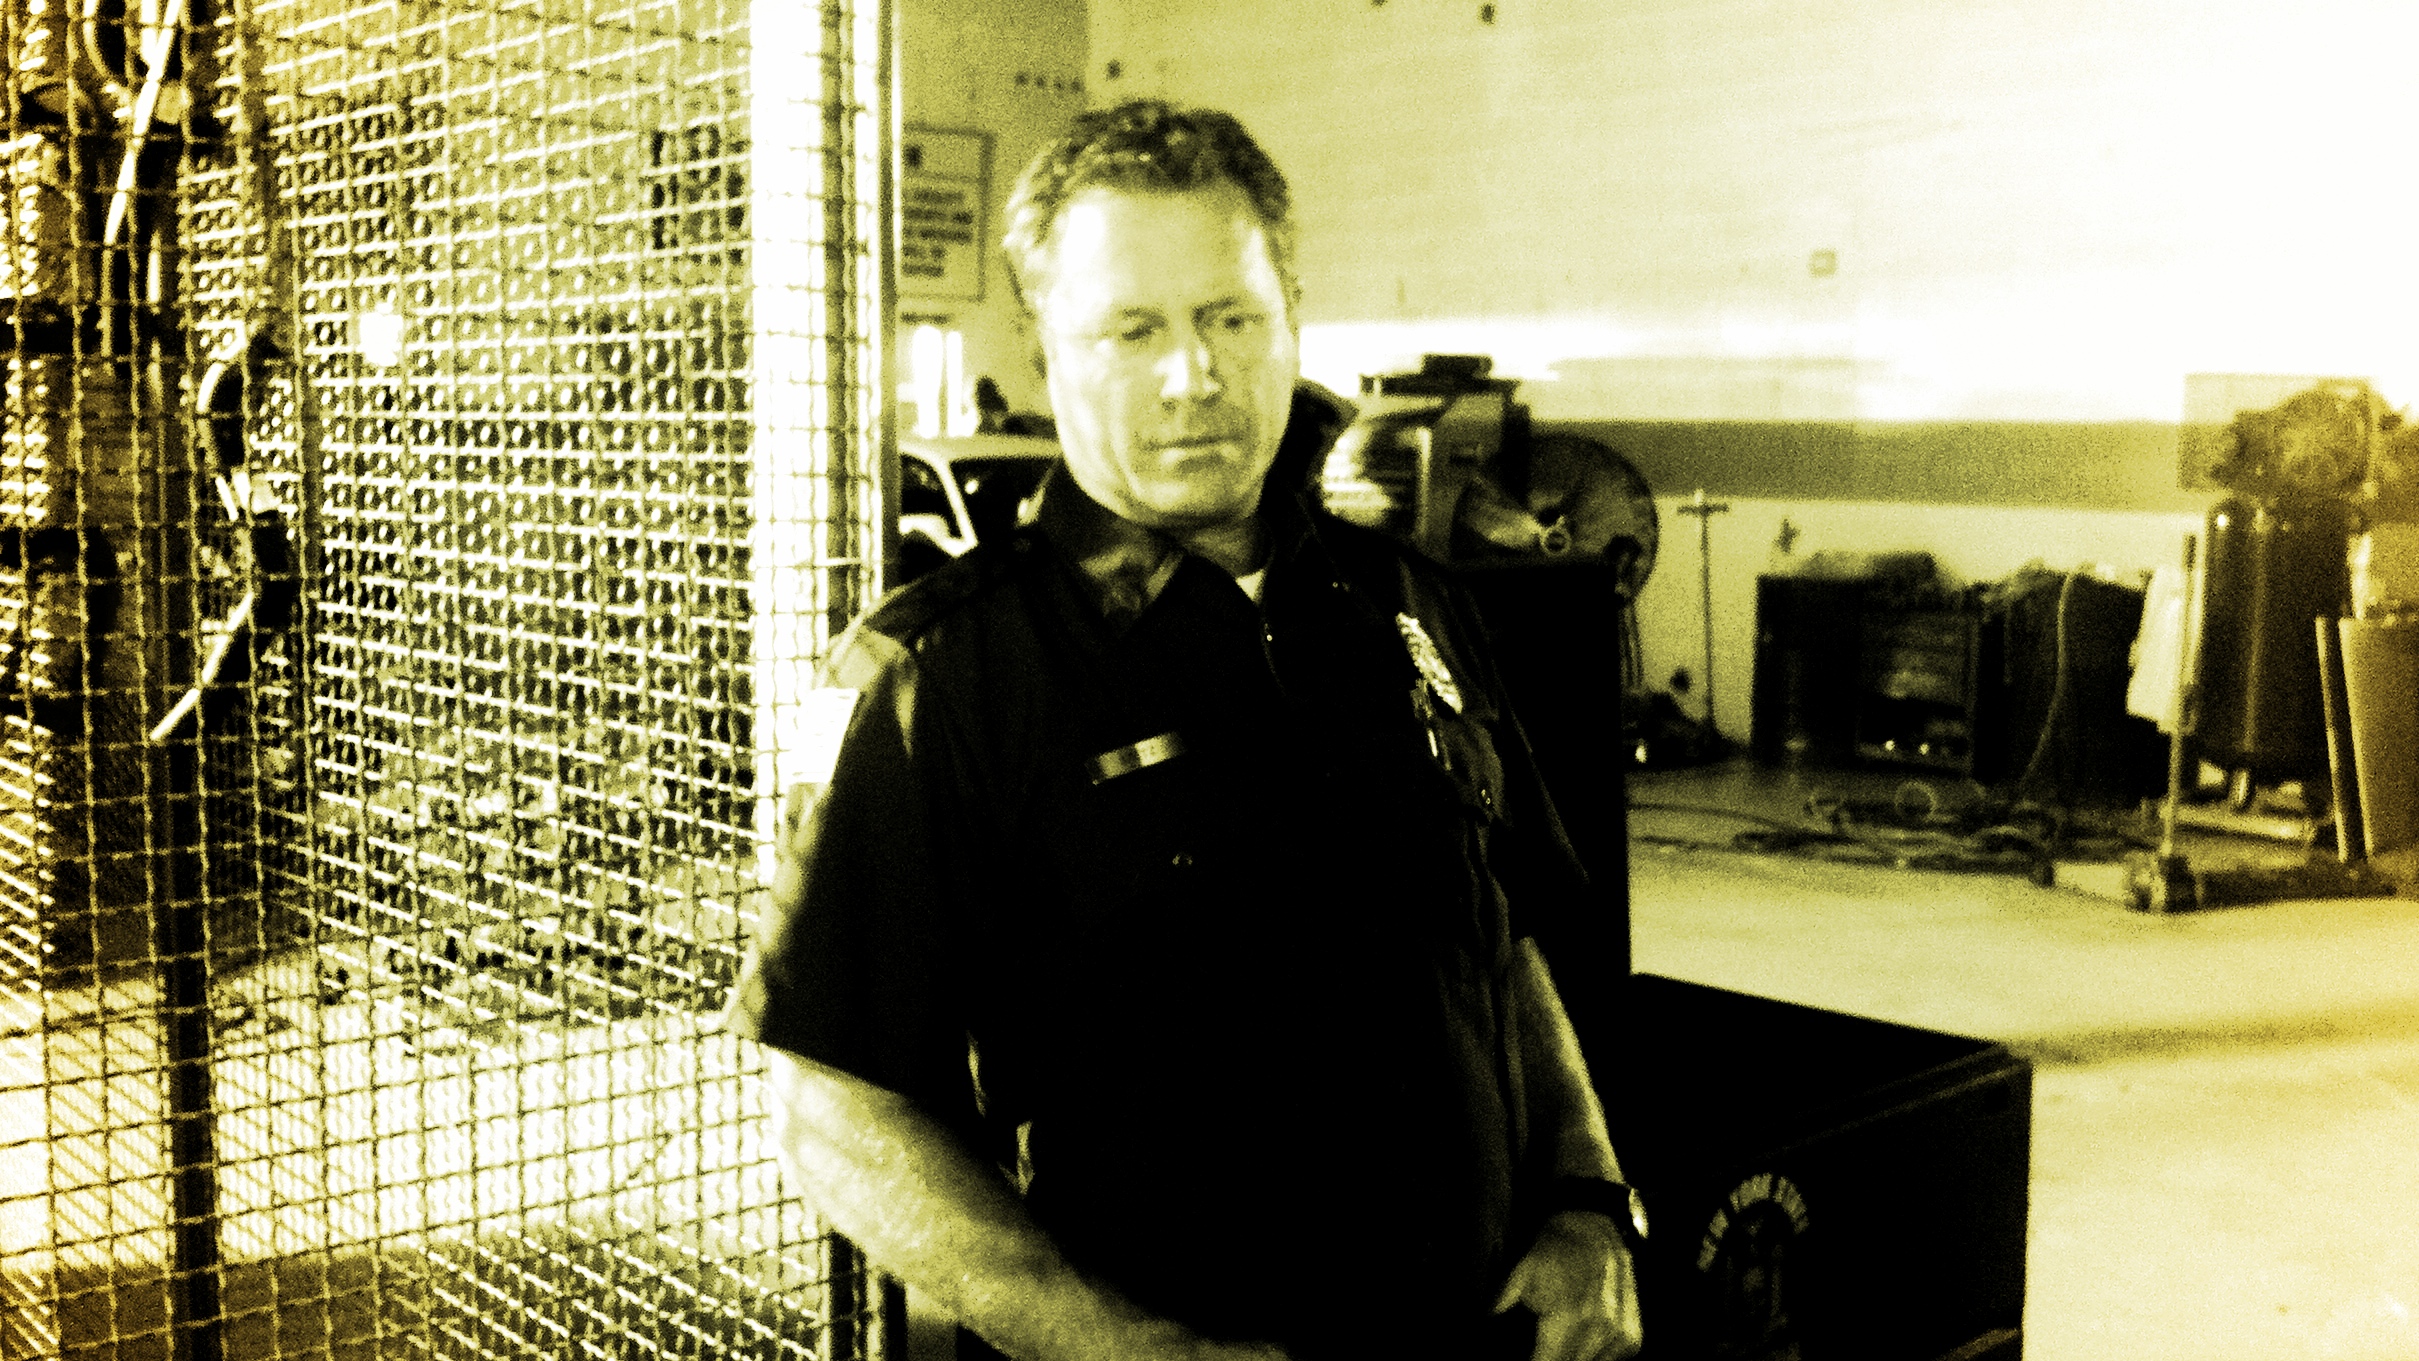 Tony Senzamici as Officer Stetz on the set of Breakout Kings